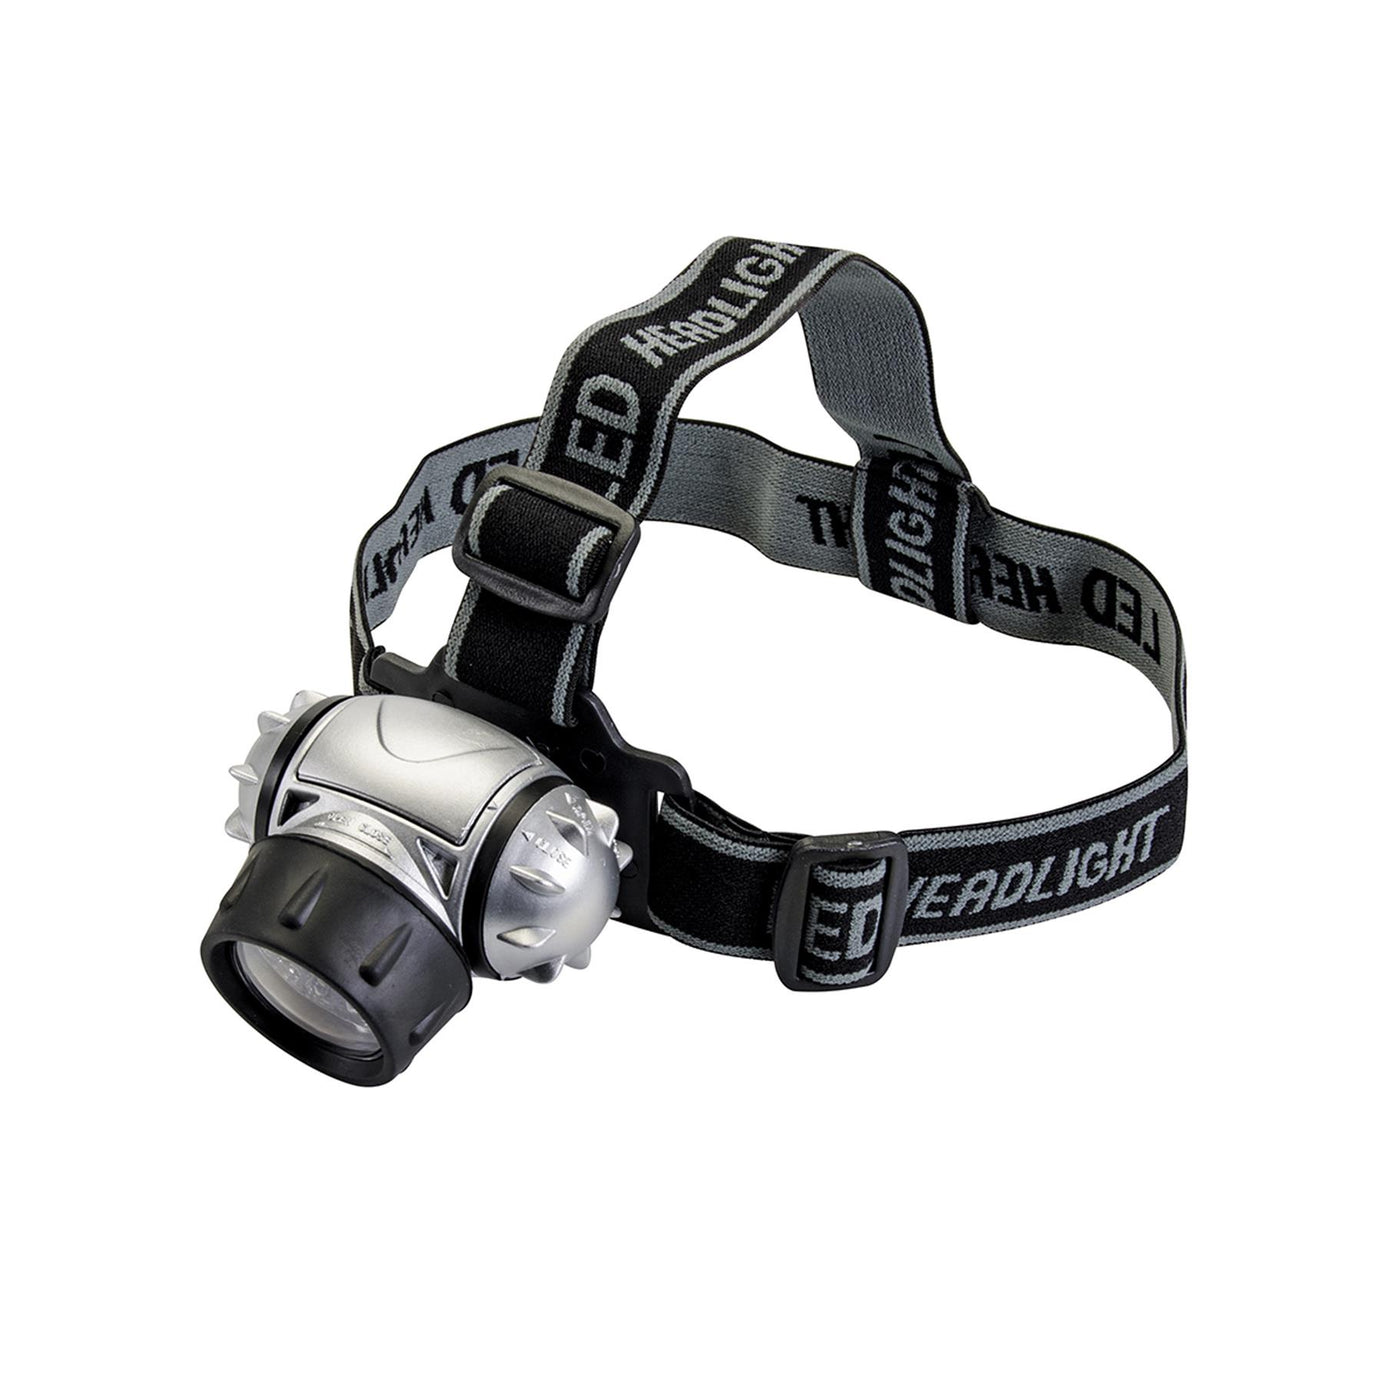 Led Headlamp 12 Led Water Resistant Variable Modes Camping Home Outdoor